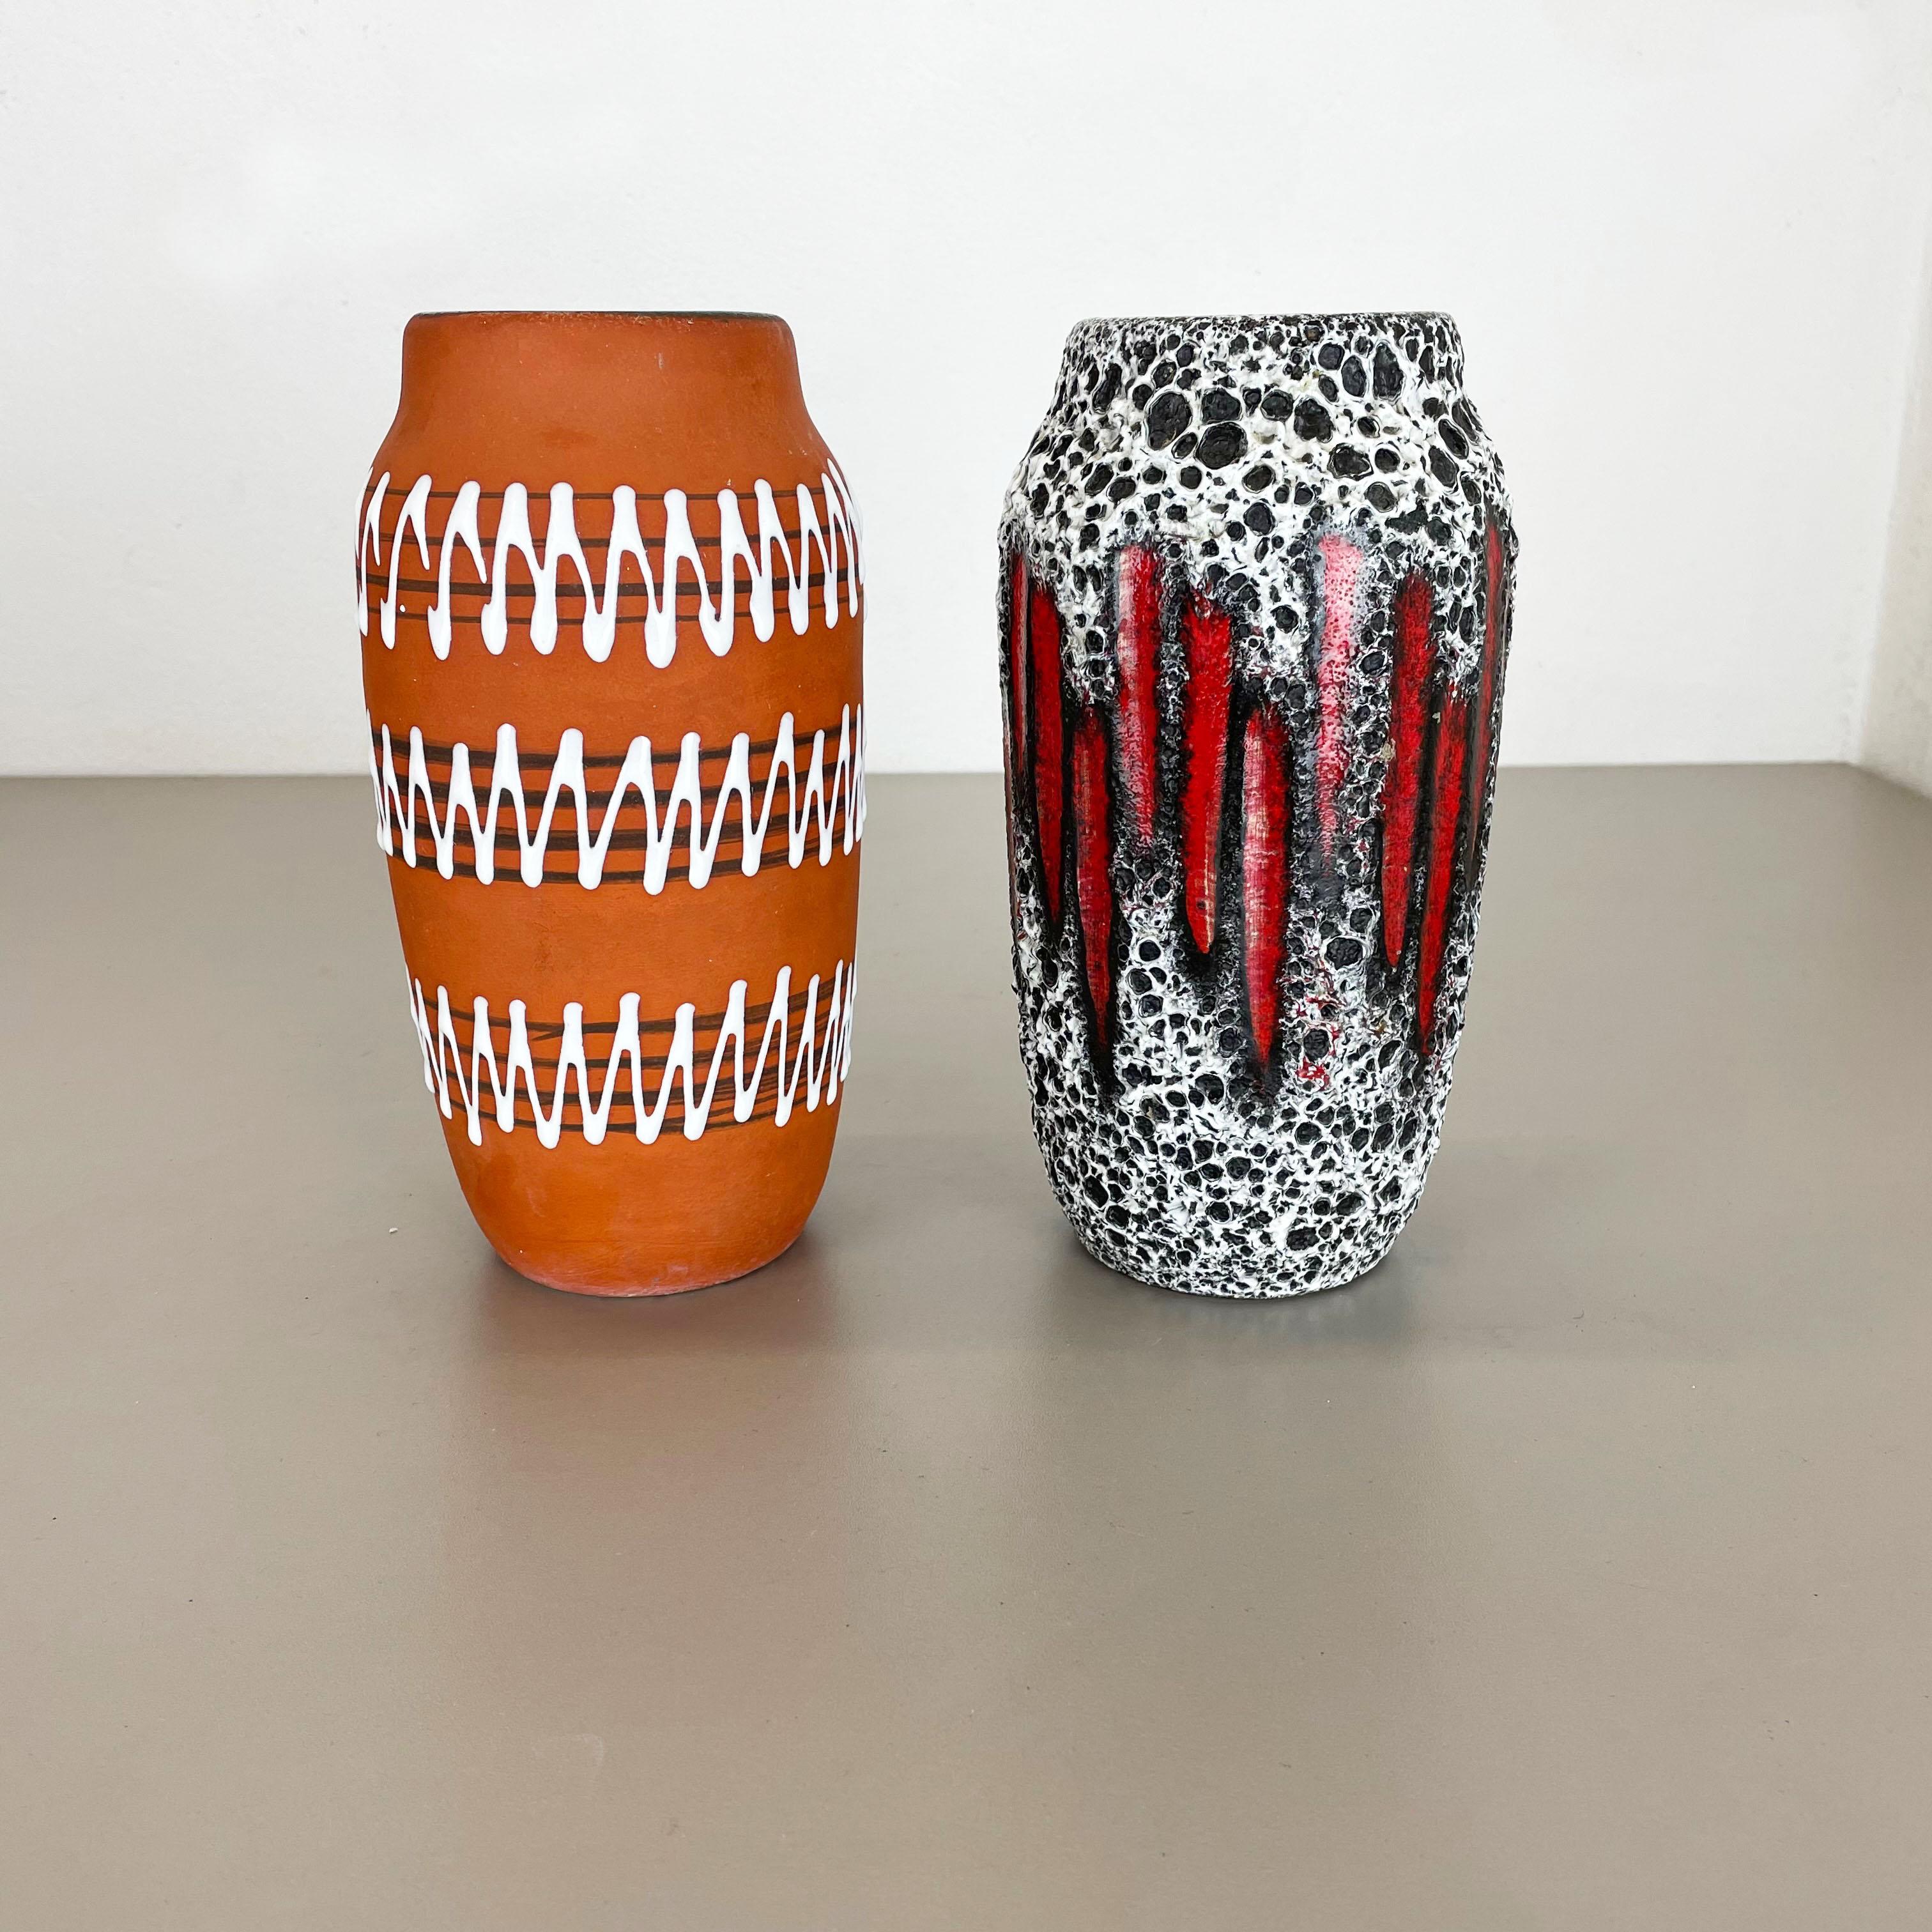 Article:

Fat lava art vase super rare zig zag set of 2


Producer:

Scheurich, Germany



Decade:

1970s




This original vintage vase set was produced in the 1970s in Germany by Scheurich. It is made of ceramic pottery in fat